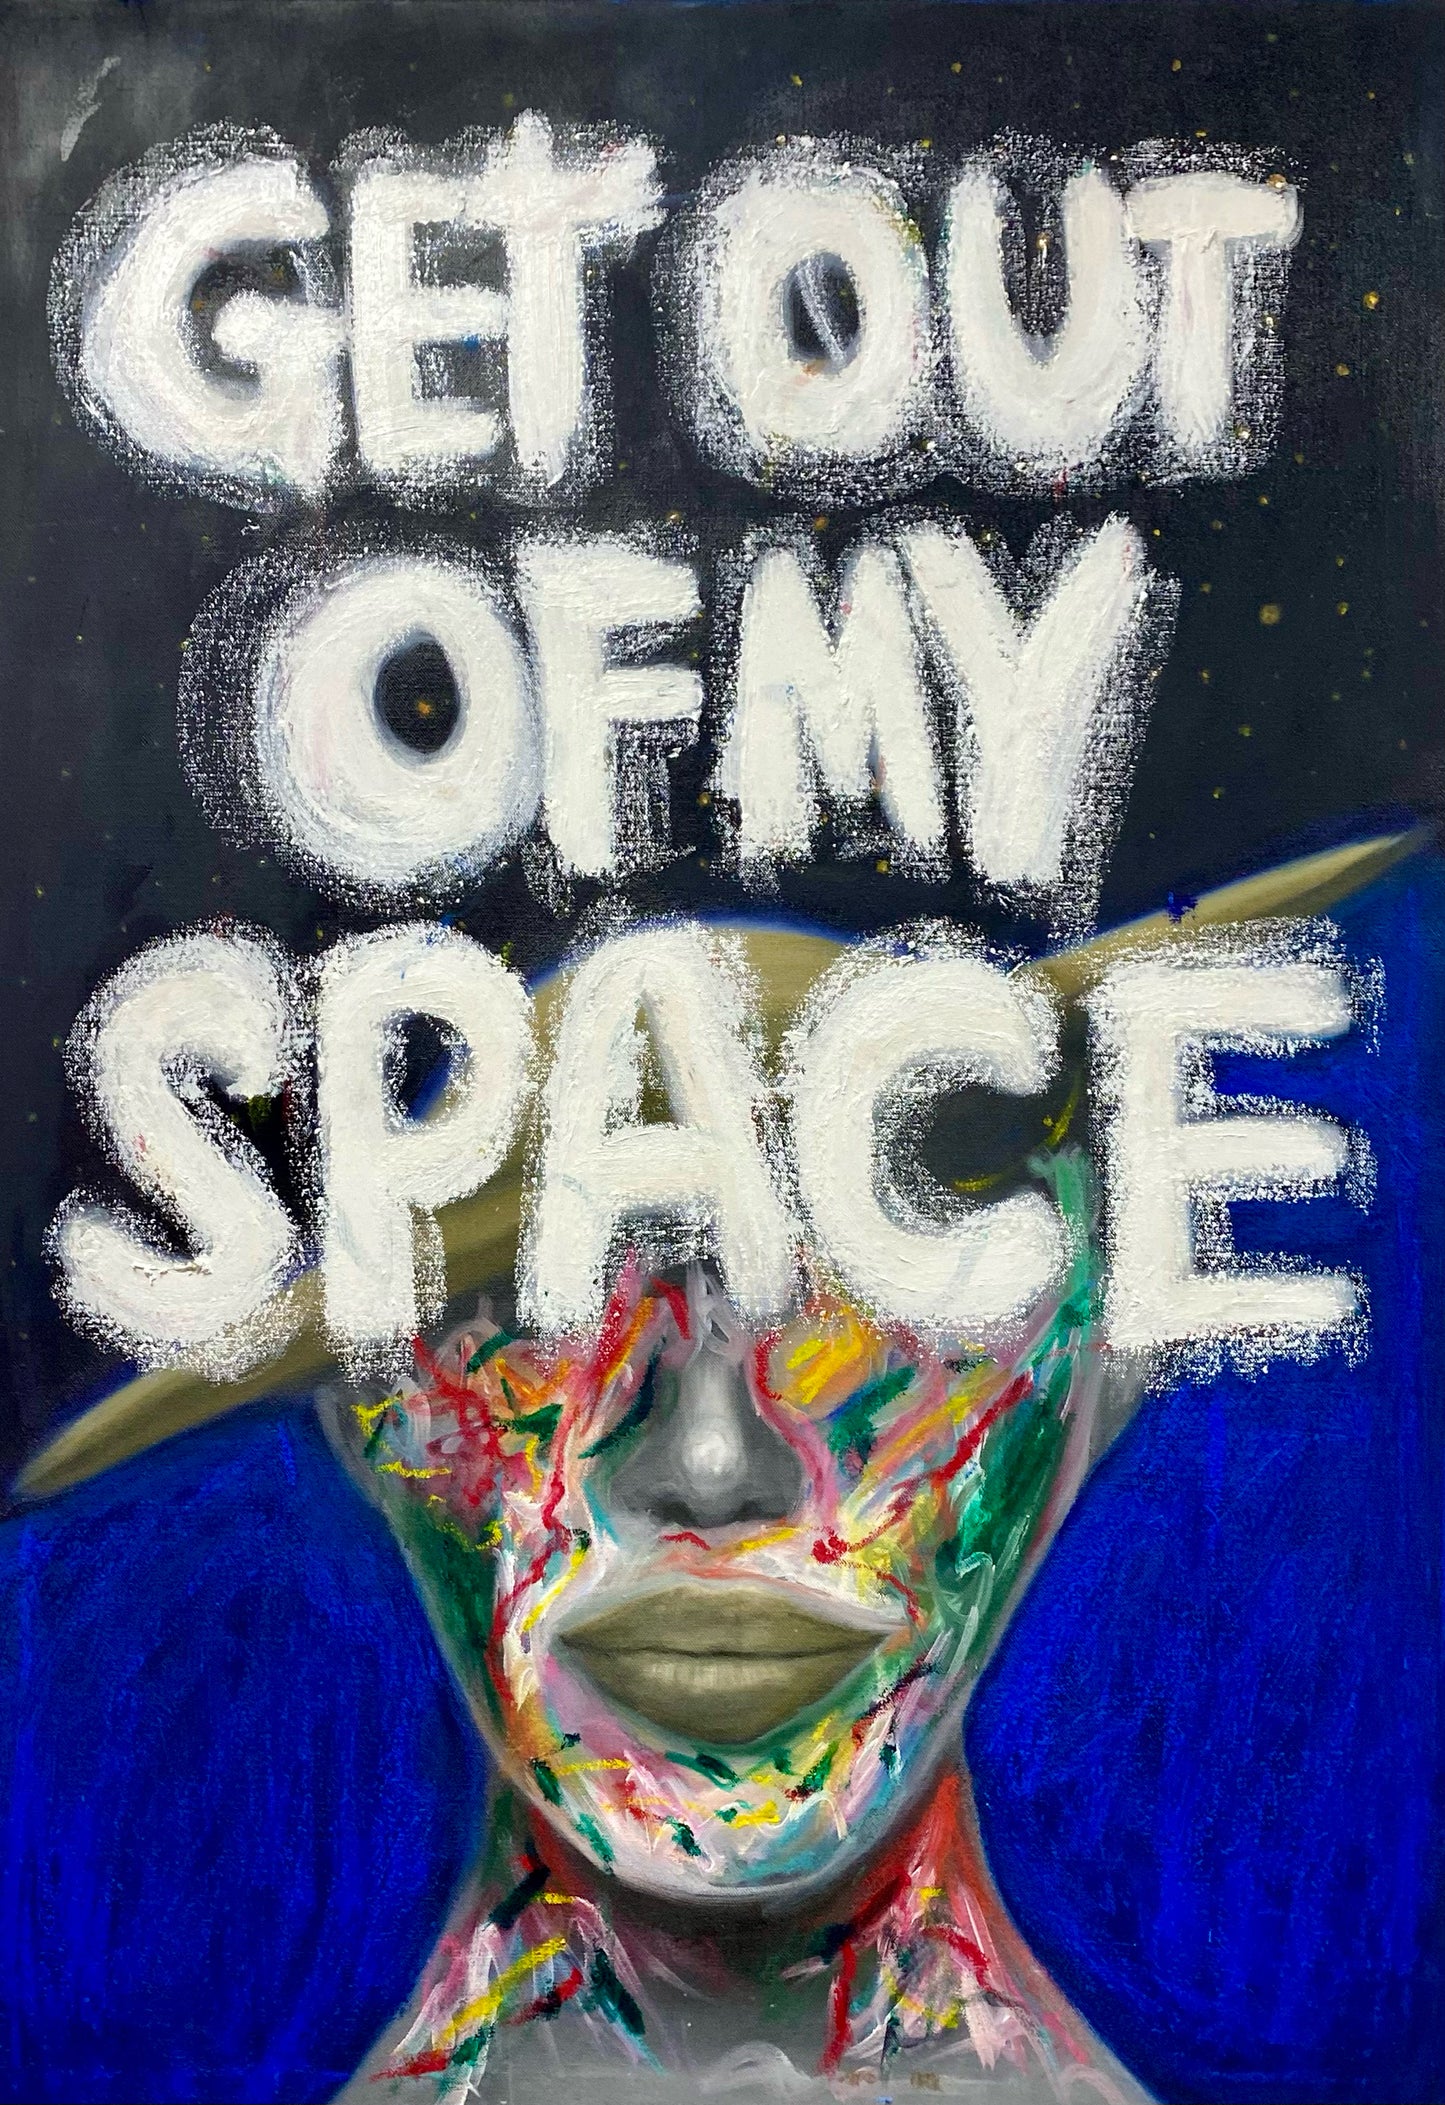 Get Out of my Space